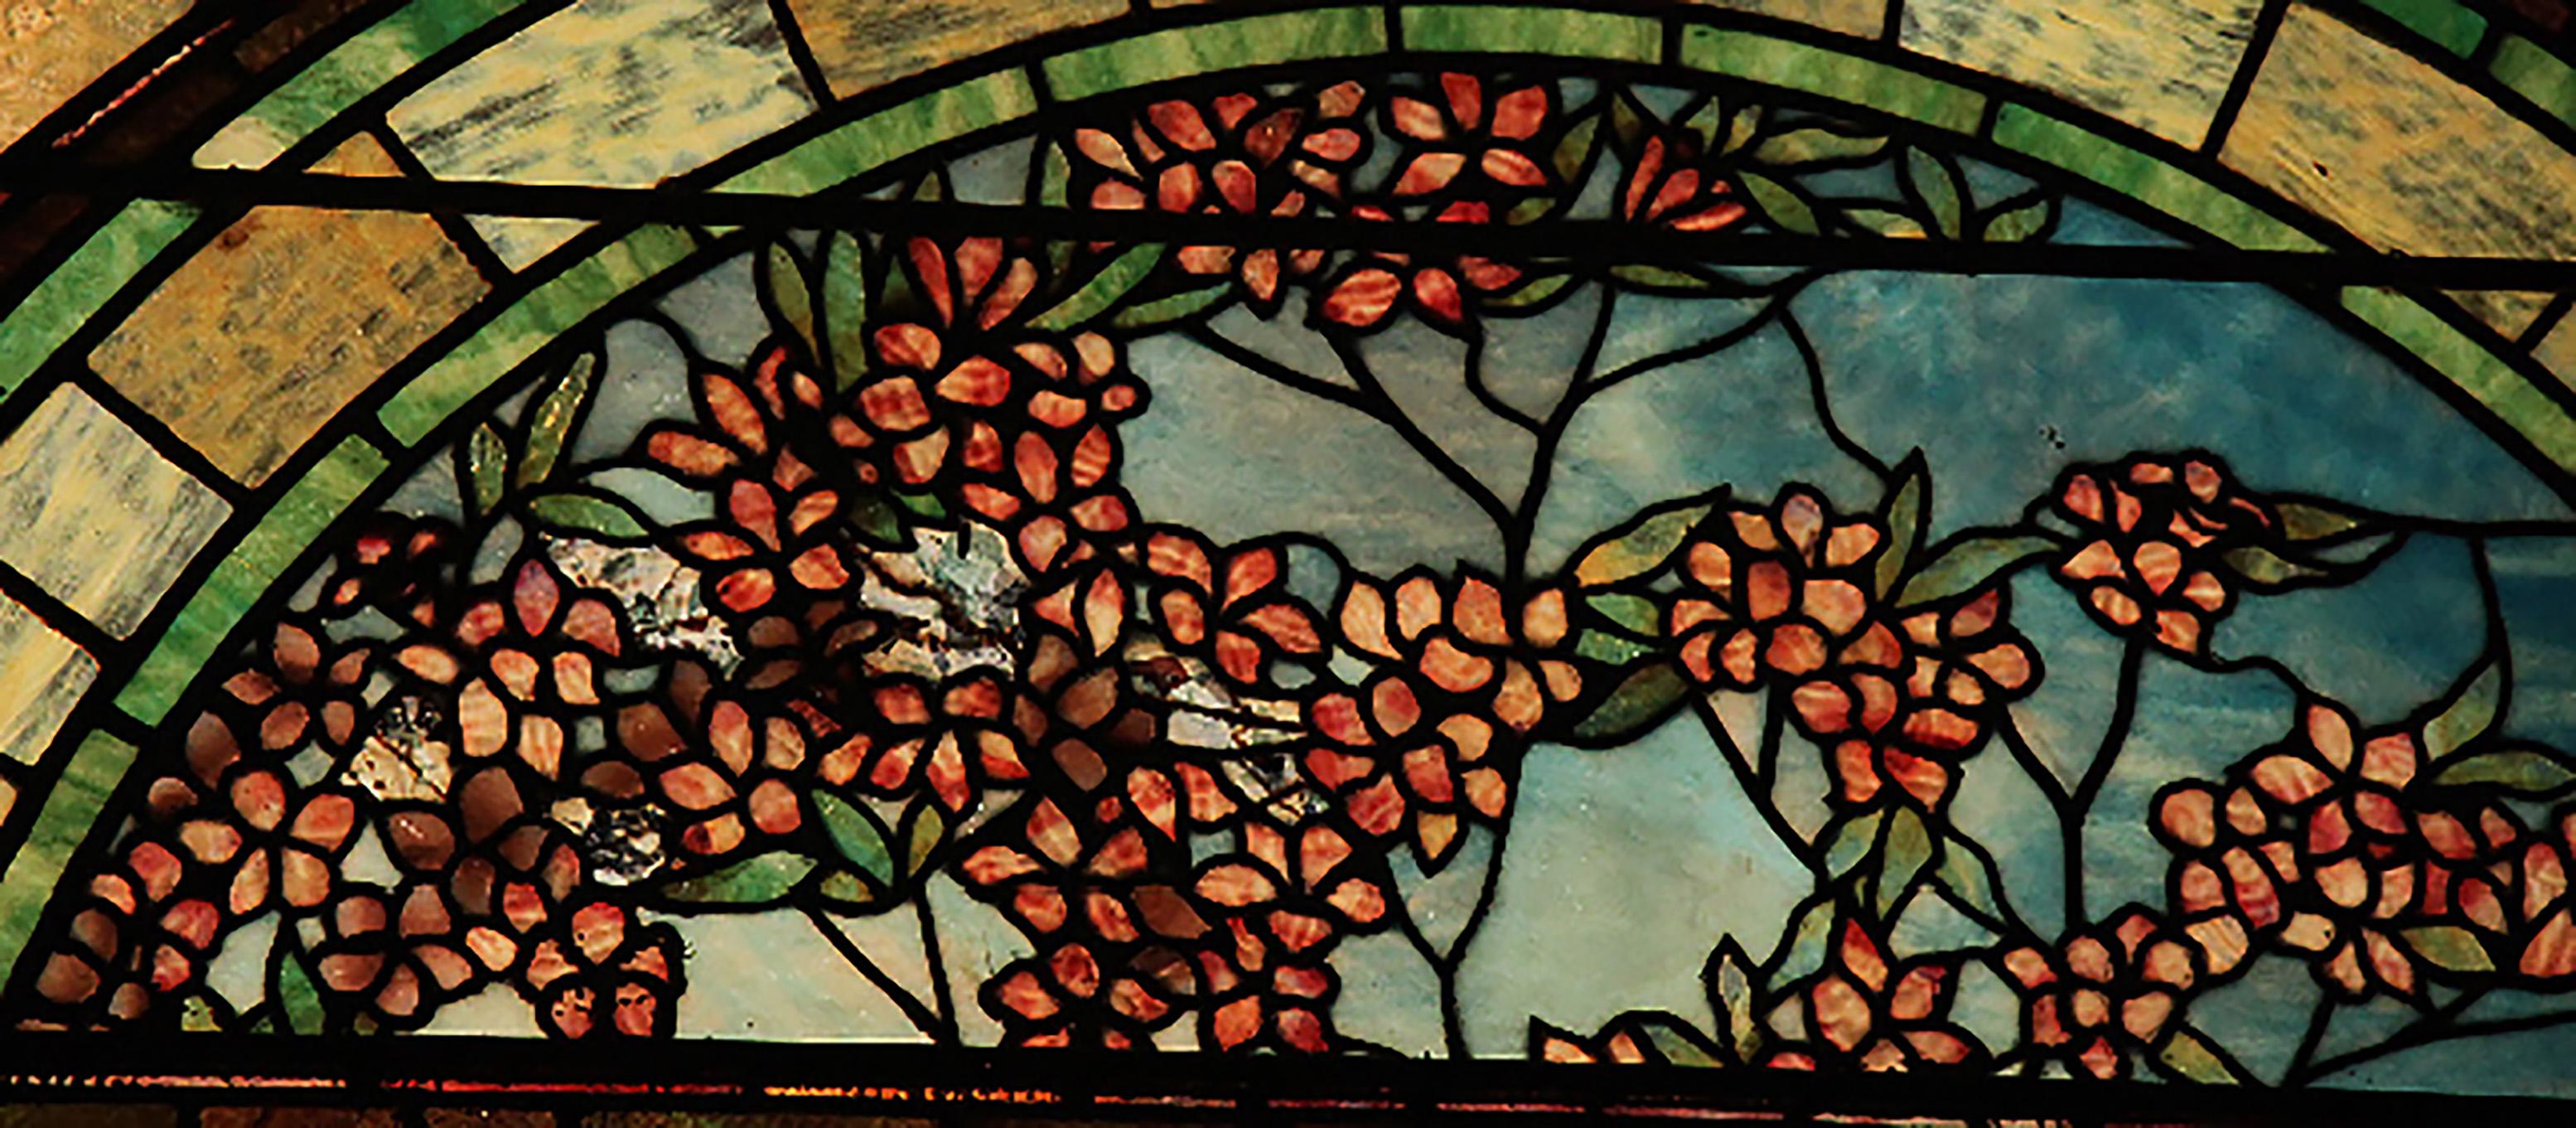 Tiffany Studios Glass Decorating New York Monumental Interior Entry In Good Condition For Sale In Van Nuys, CA